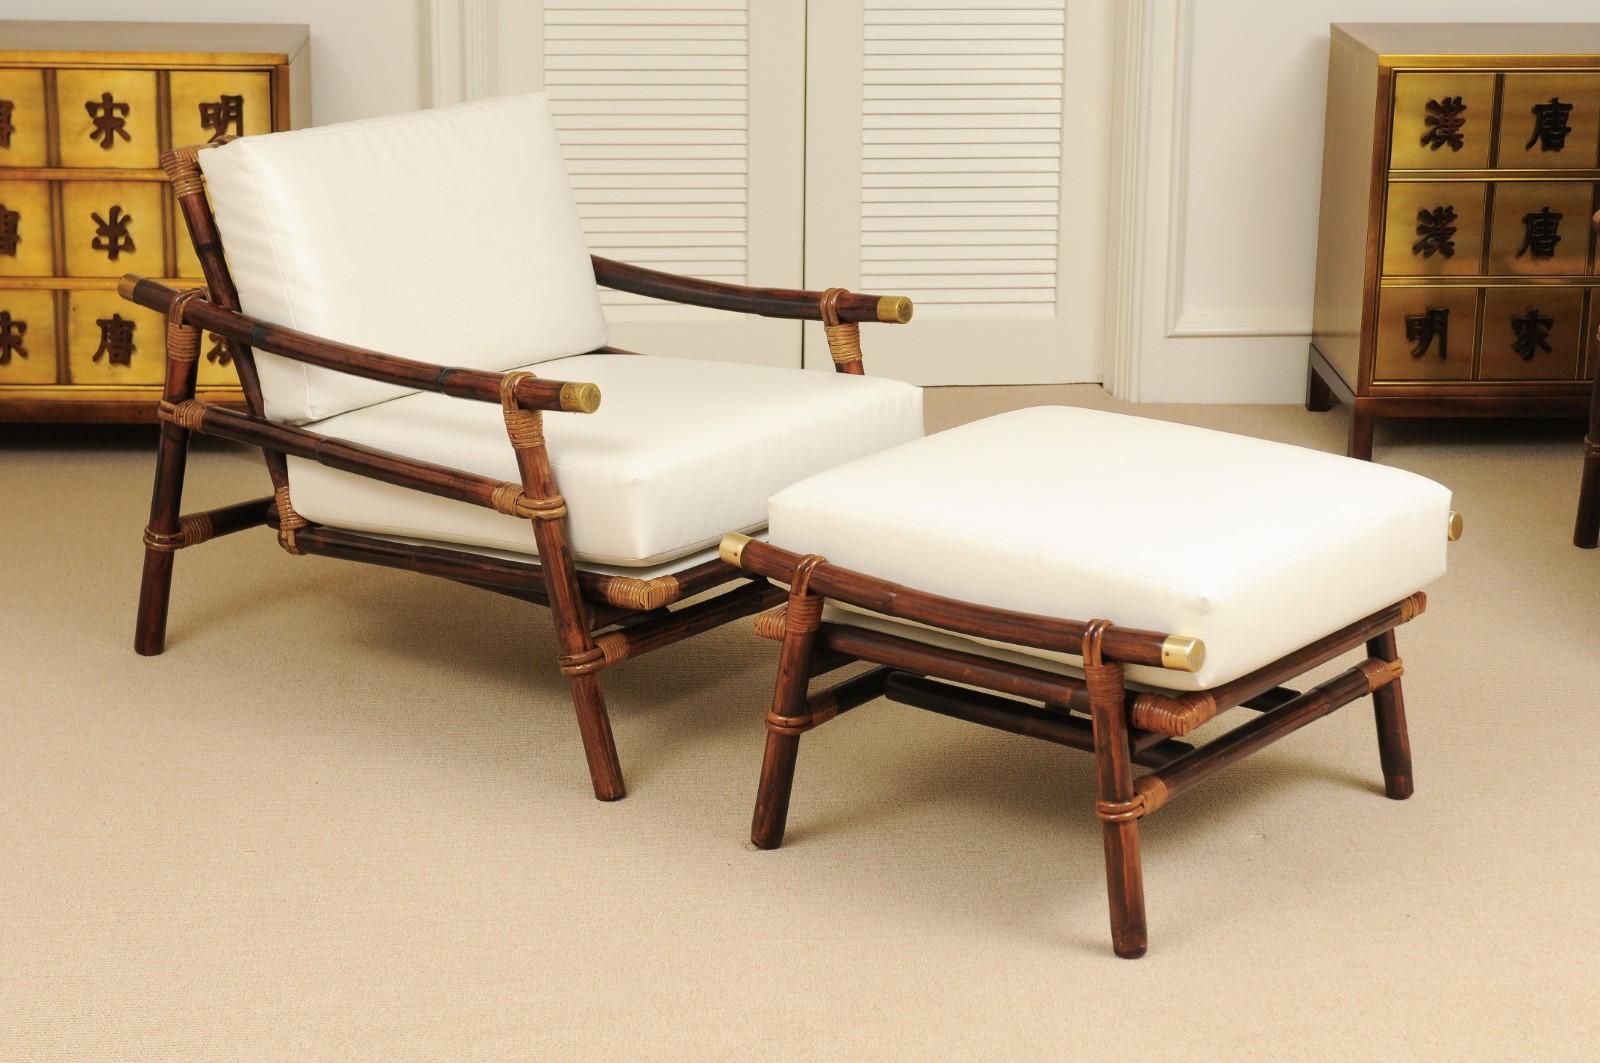 Superb Restored Pair of Campaign Loungers by Wisner for Ficks Reed, circa 1954 11